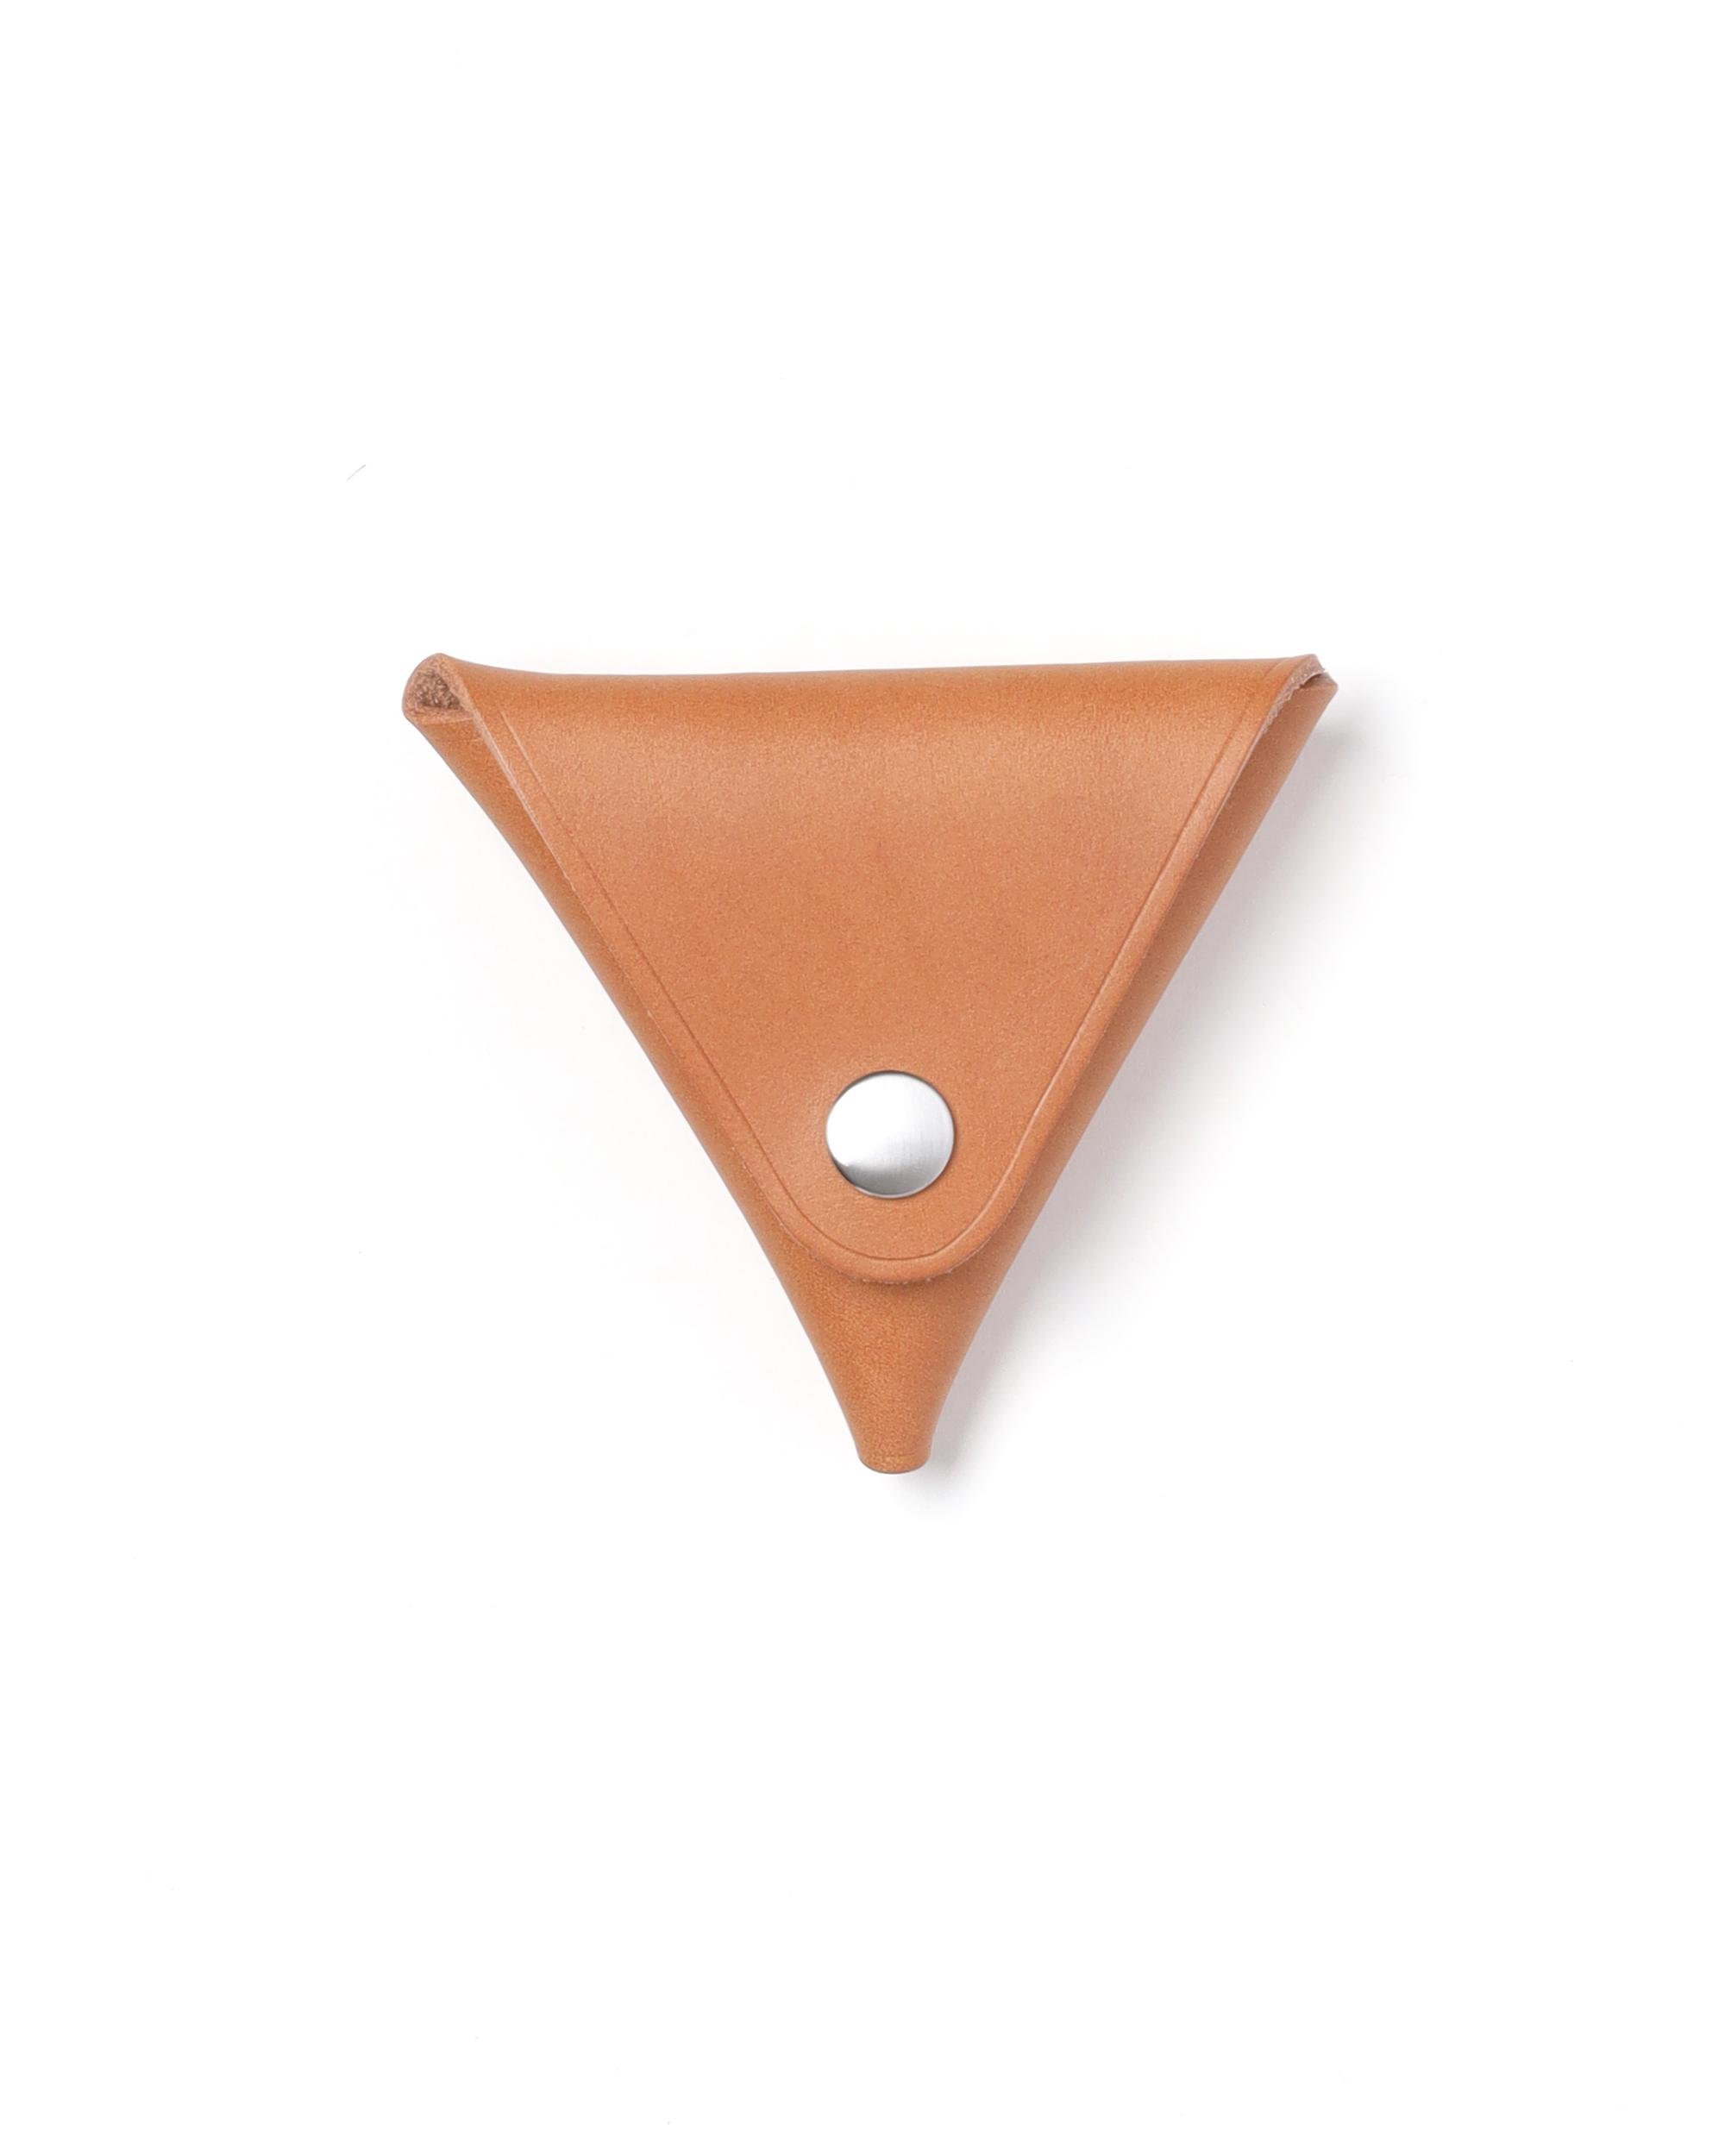 Leather triangle pouch by HENDER SCHEME